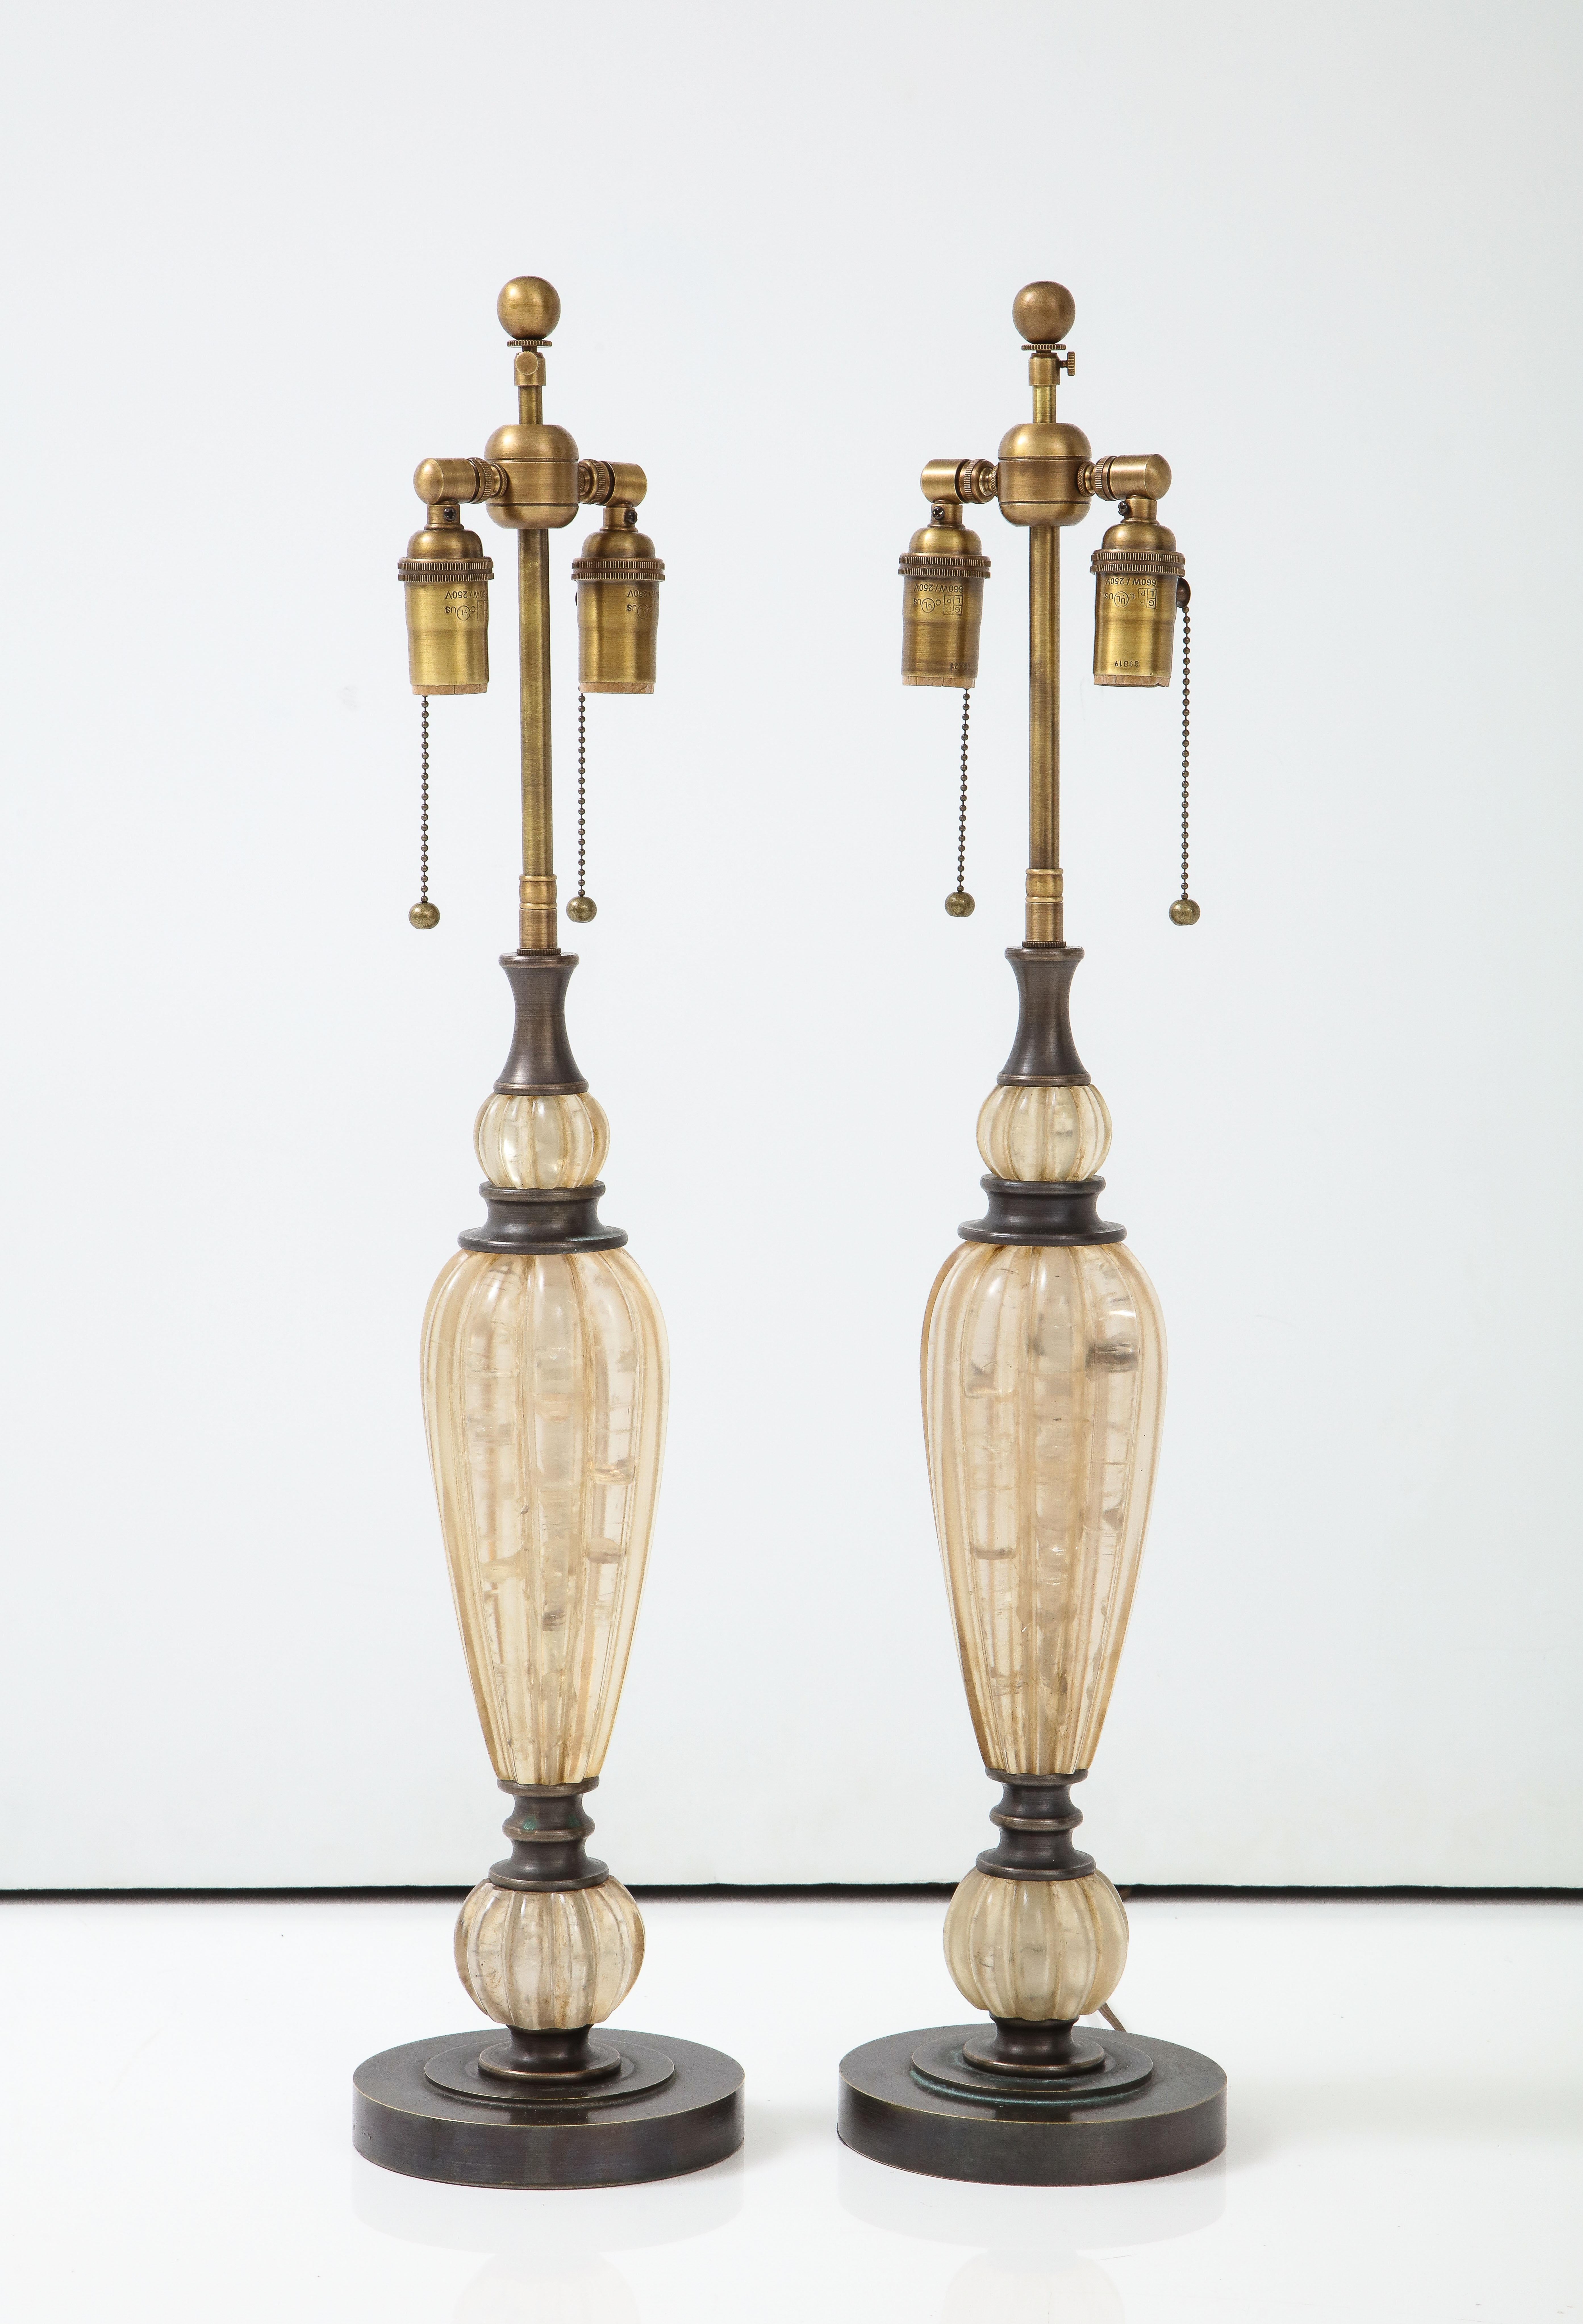 Pair of Taupe colored Resin lamps with bronzed finished hardware.
The lamps have been Newly rewired with adjustable Bronzed double clusters and Rayon cords.